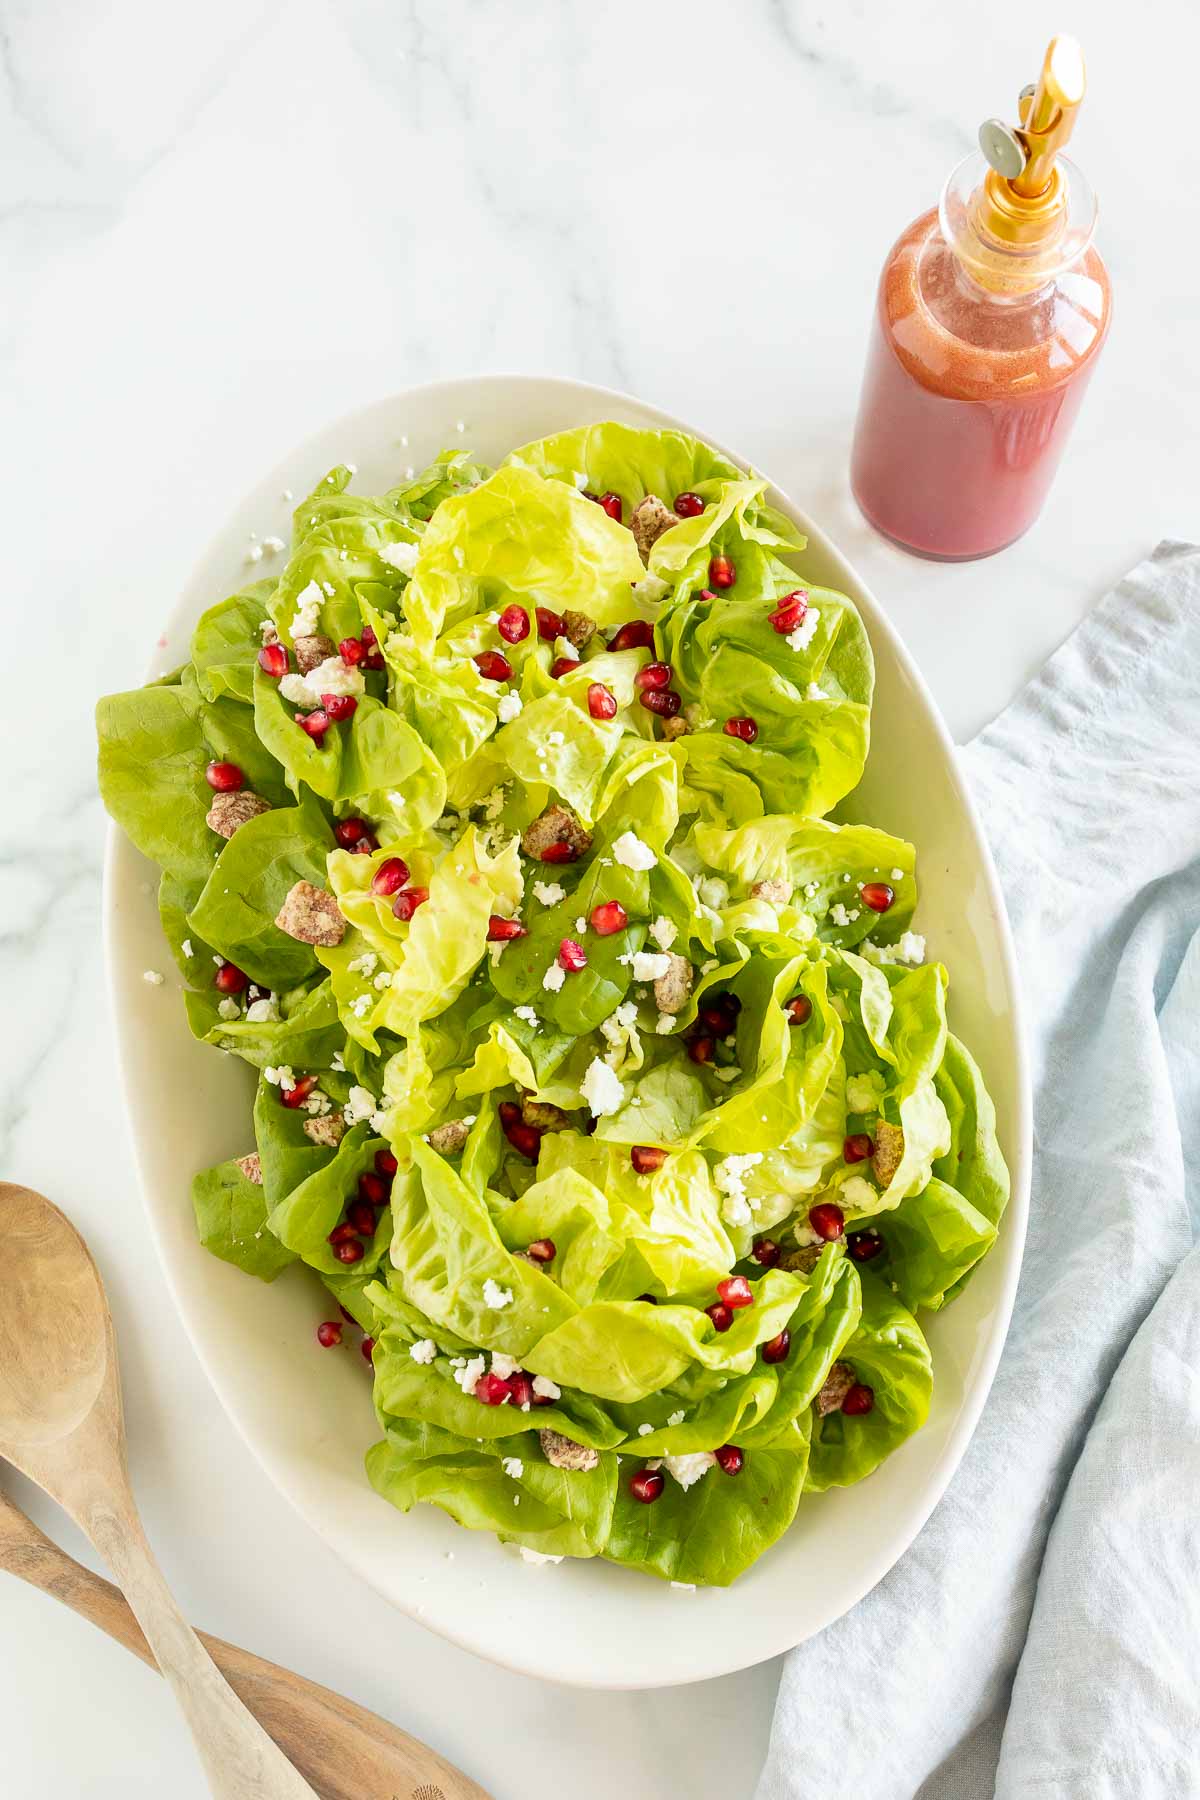 pomegranate salad on a platter with dressing next and wood servers